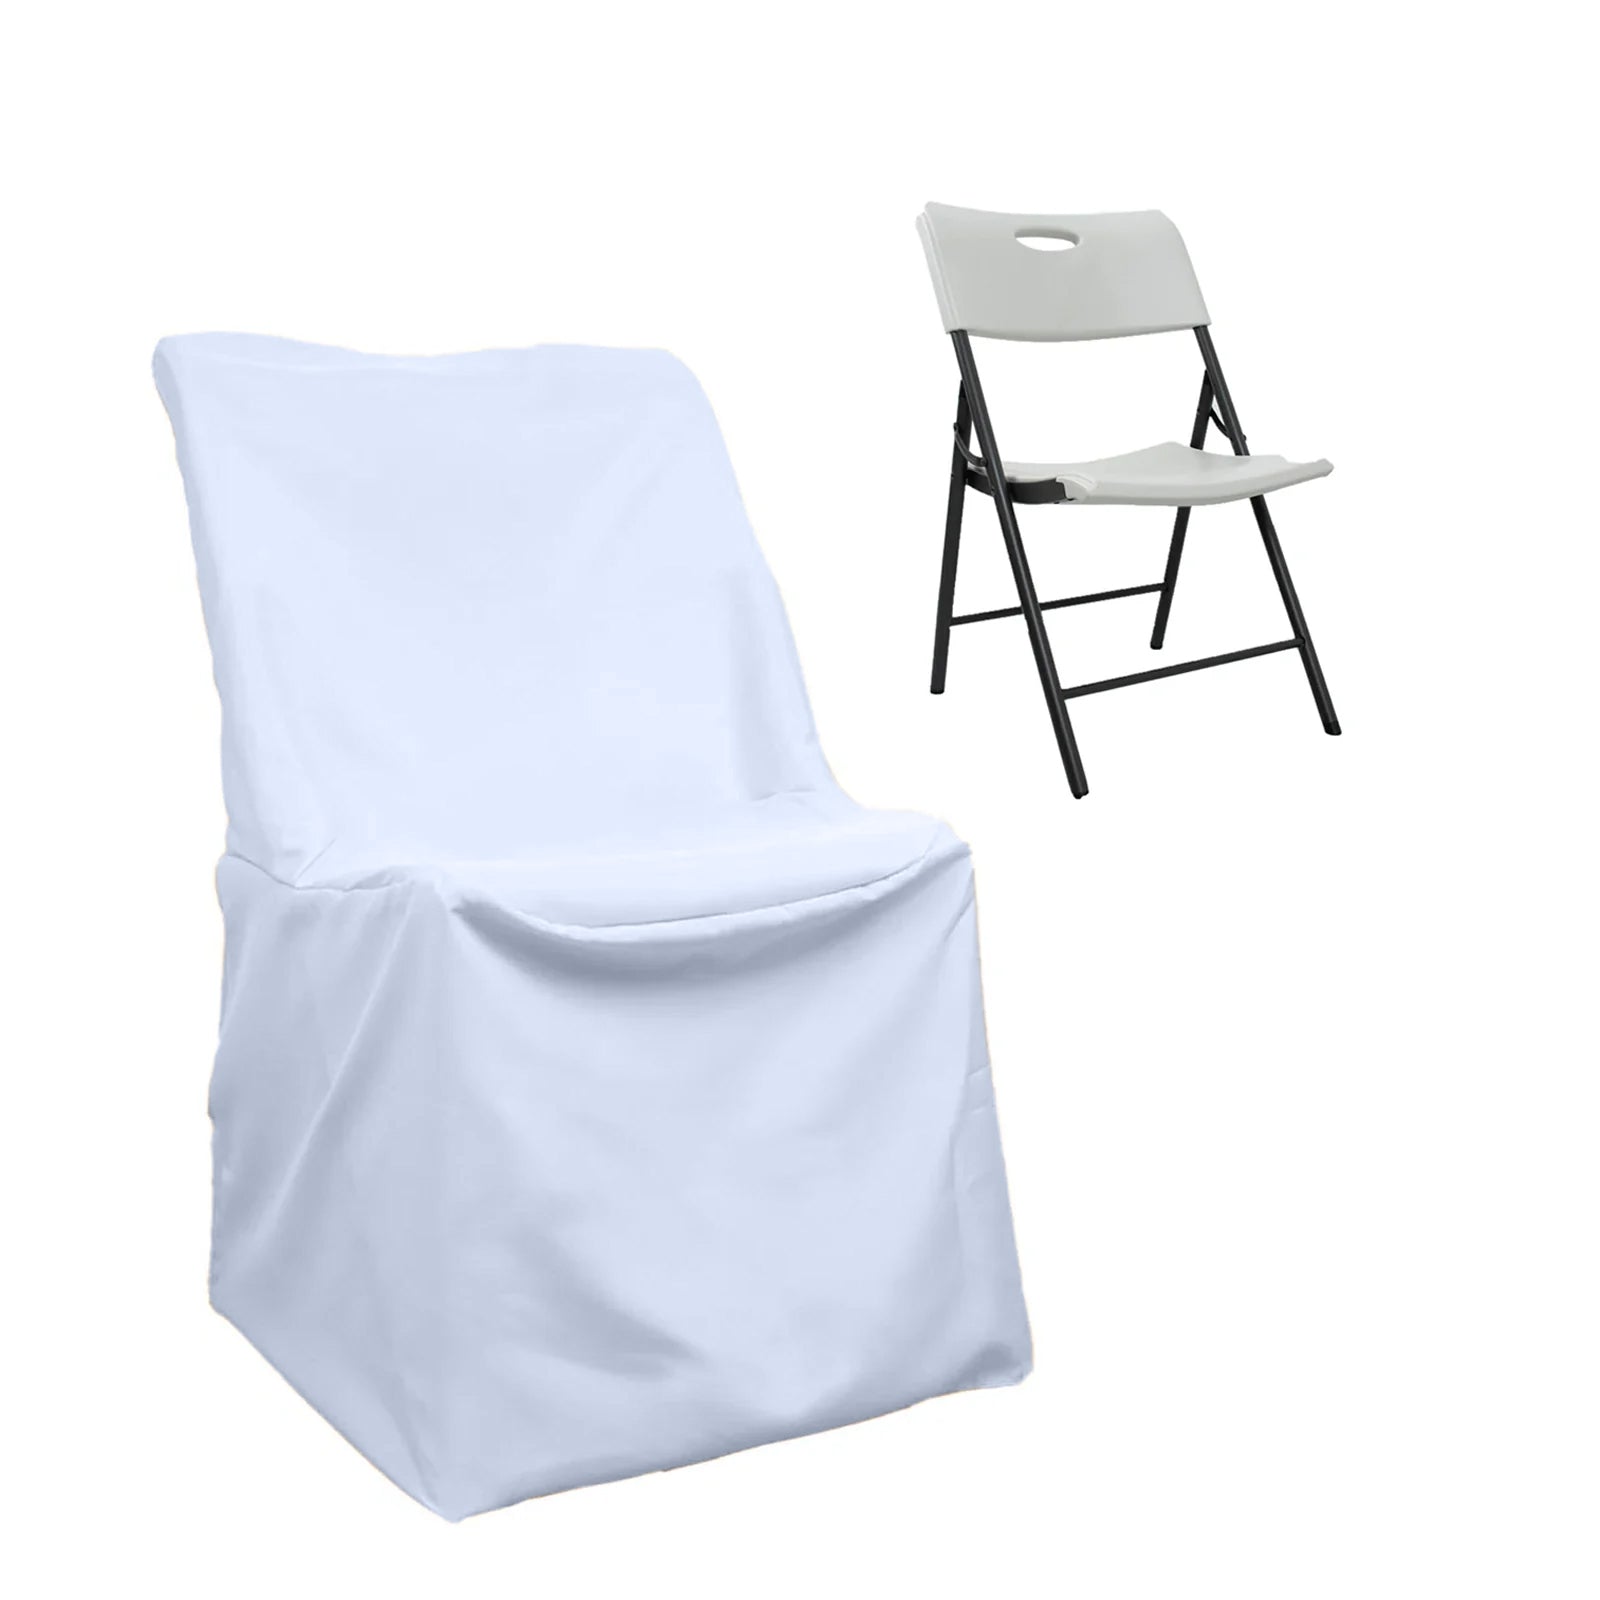 Chair Covers For Lifetime Folding Chairs Outlet